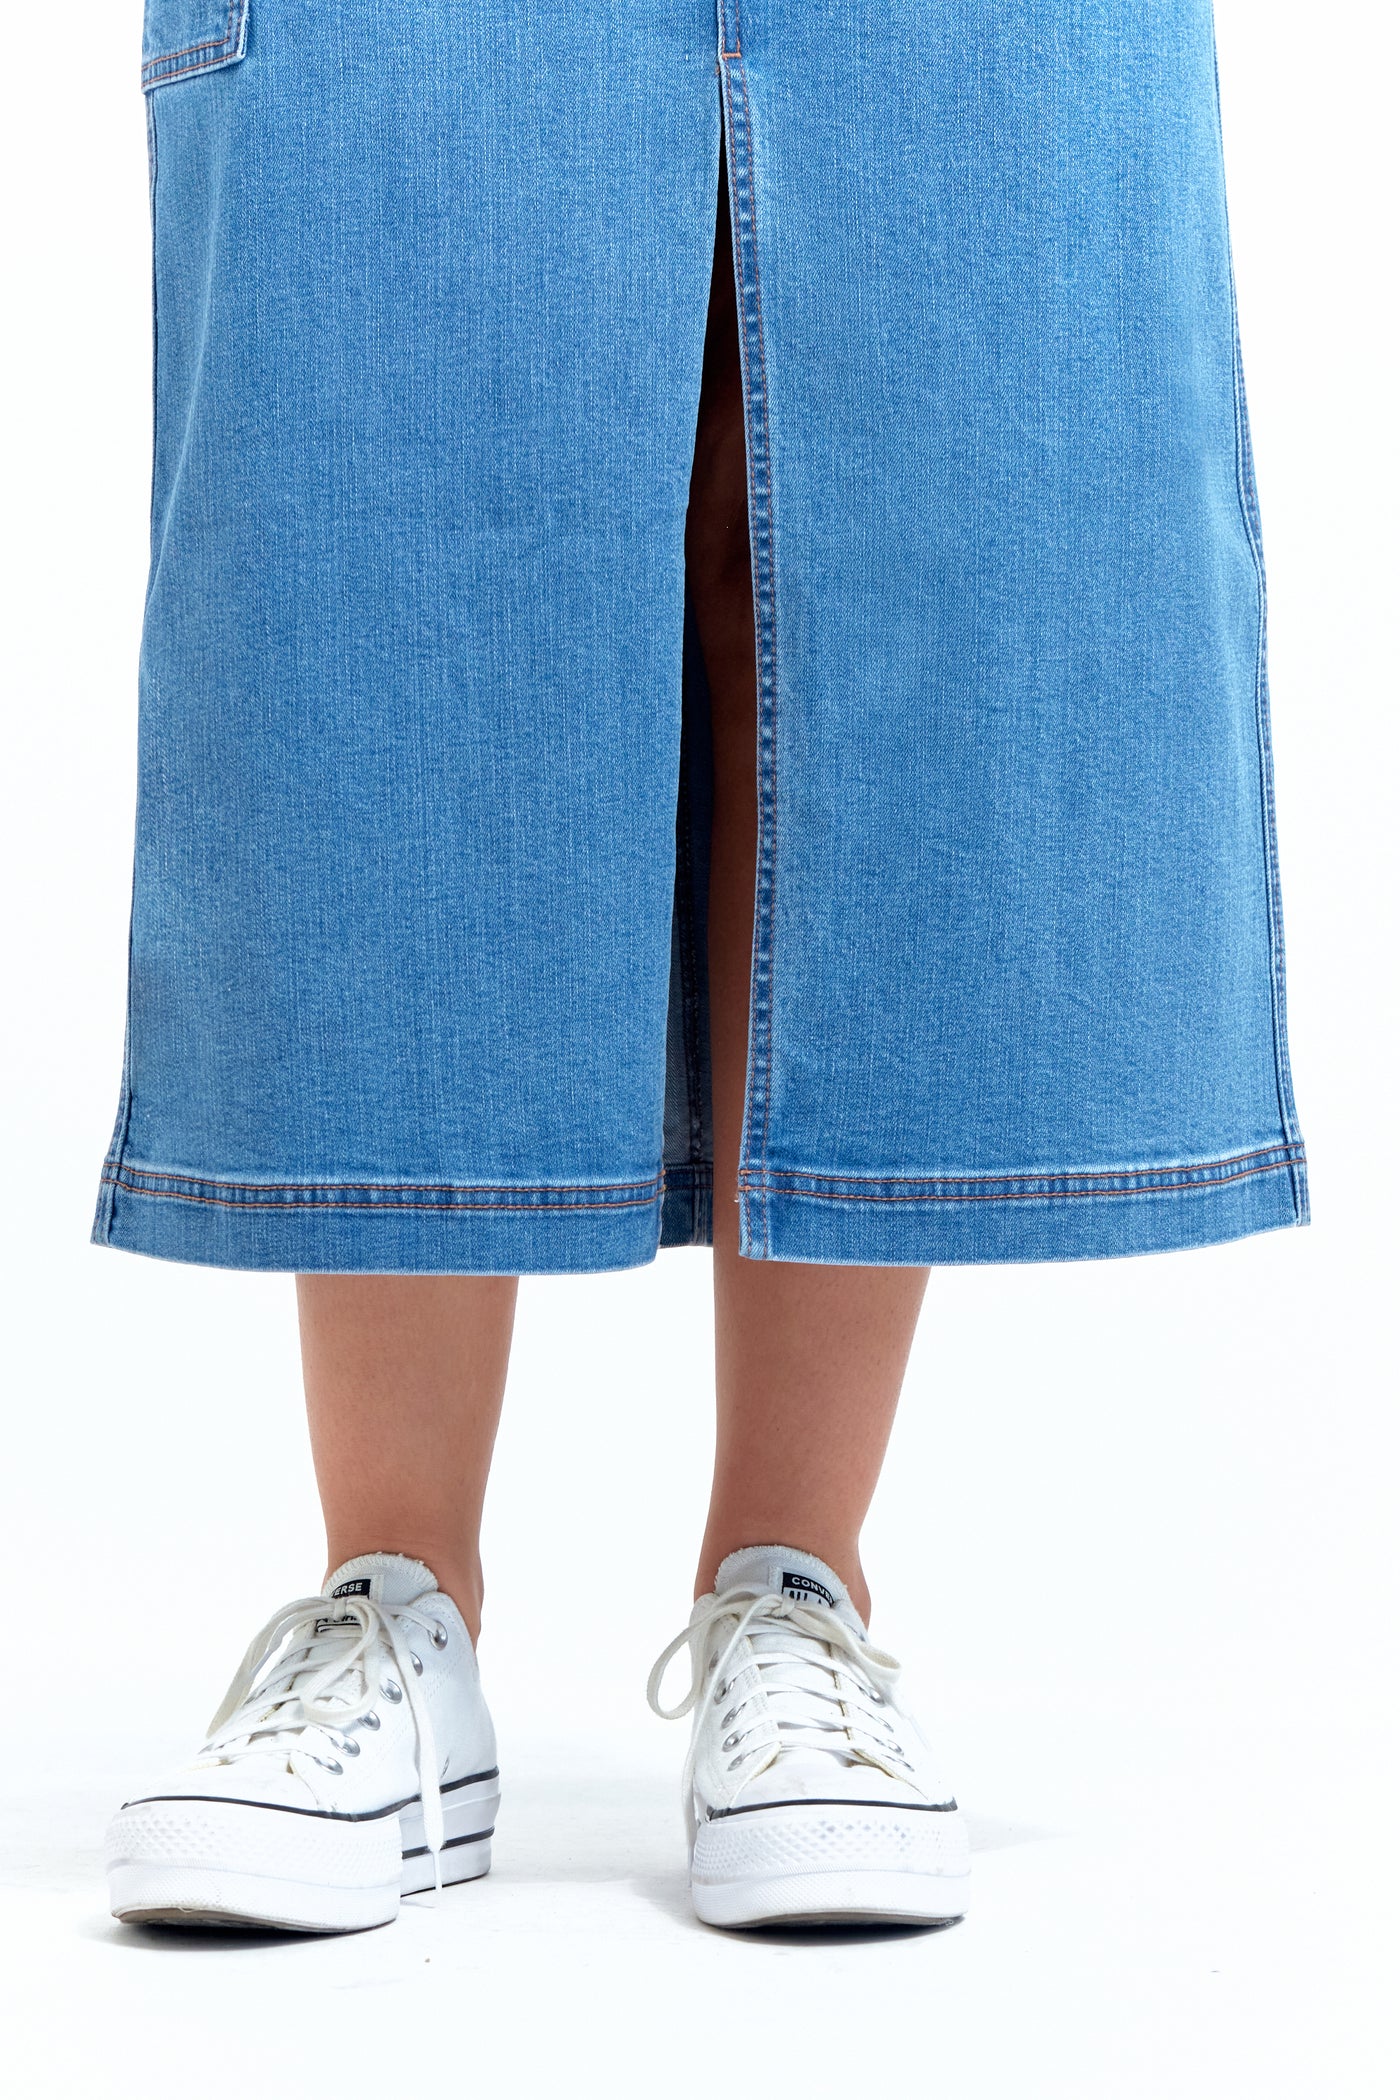 Classic Cargo Skirt with Slant Pockets in Terra